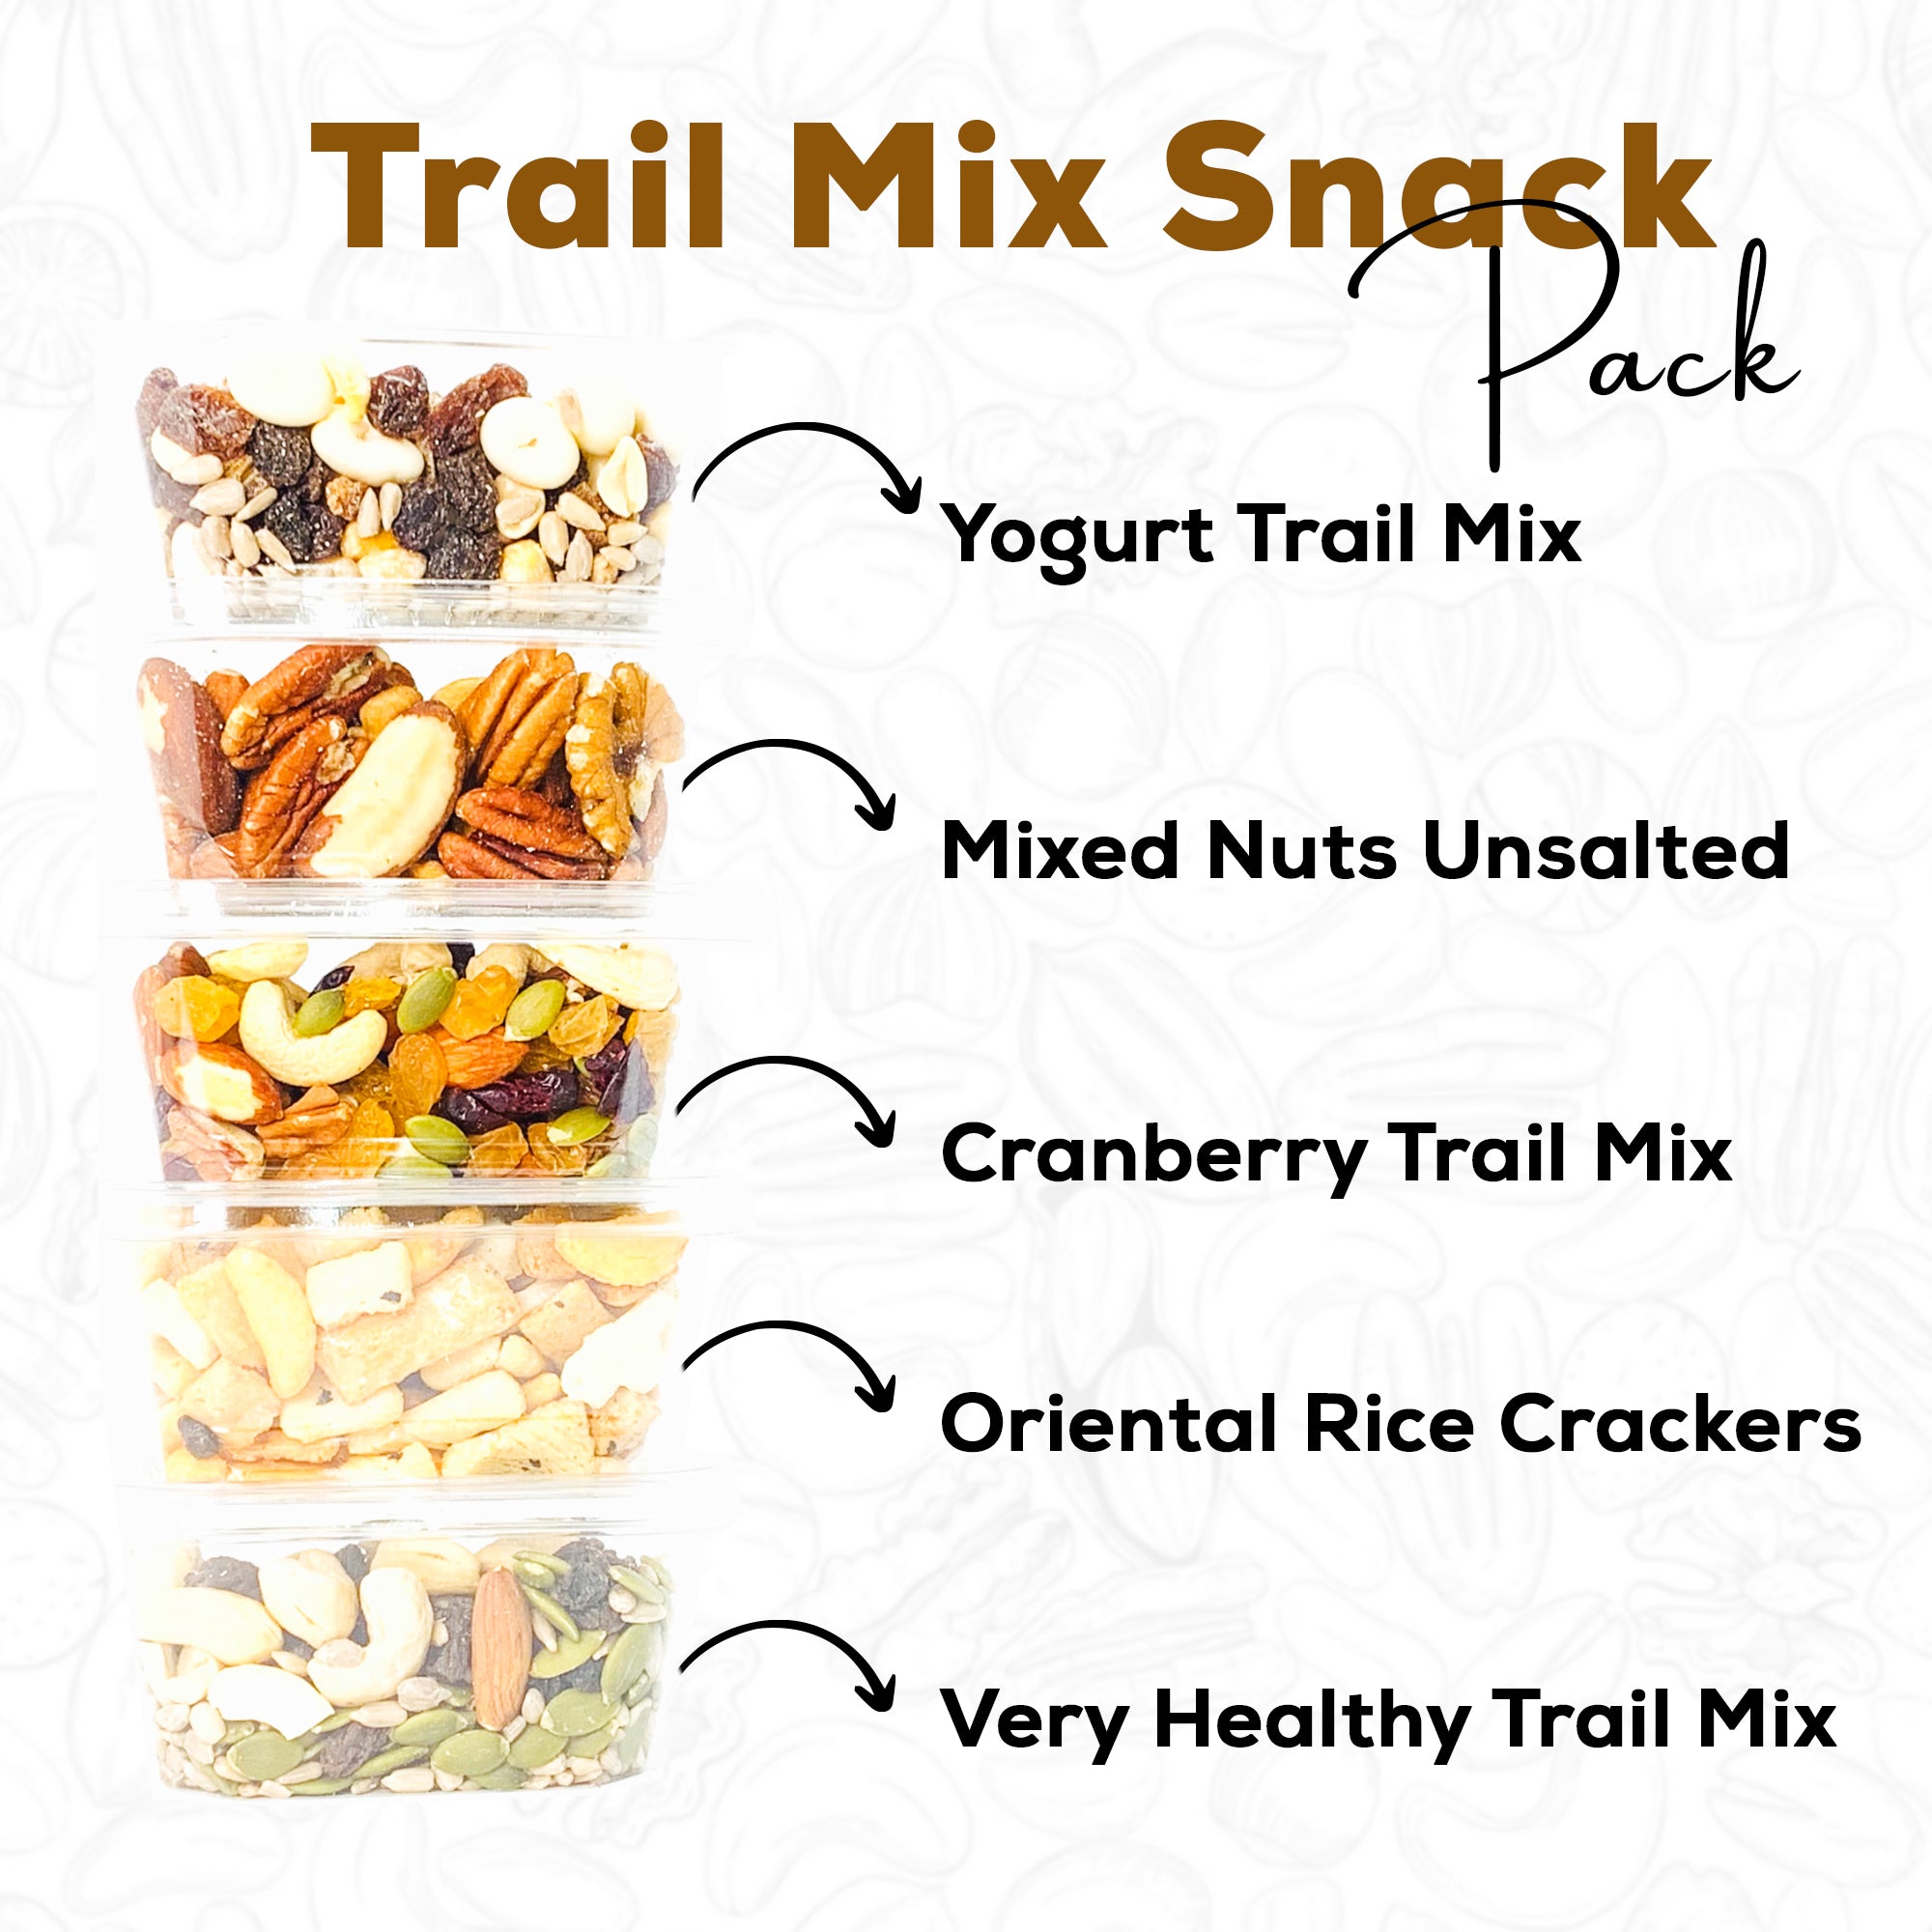 Snack pack offers online